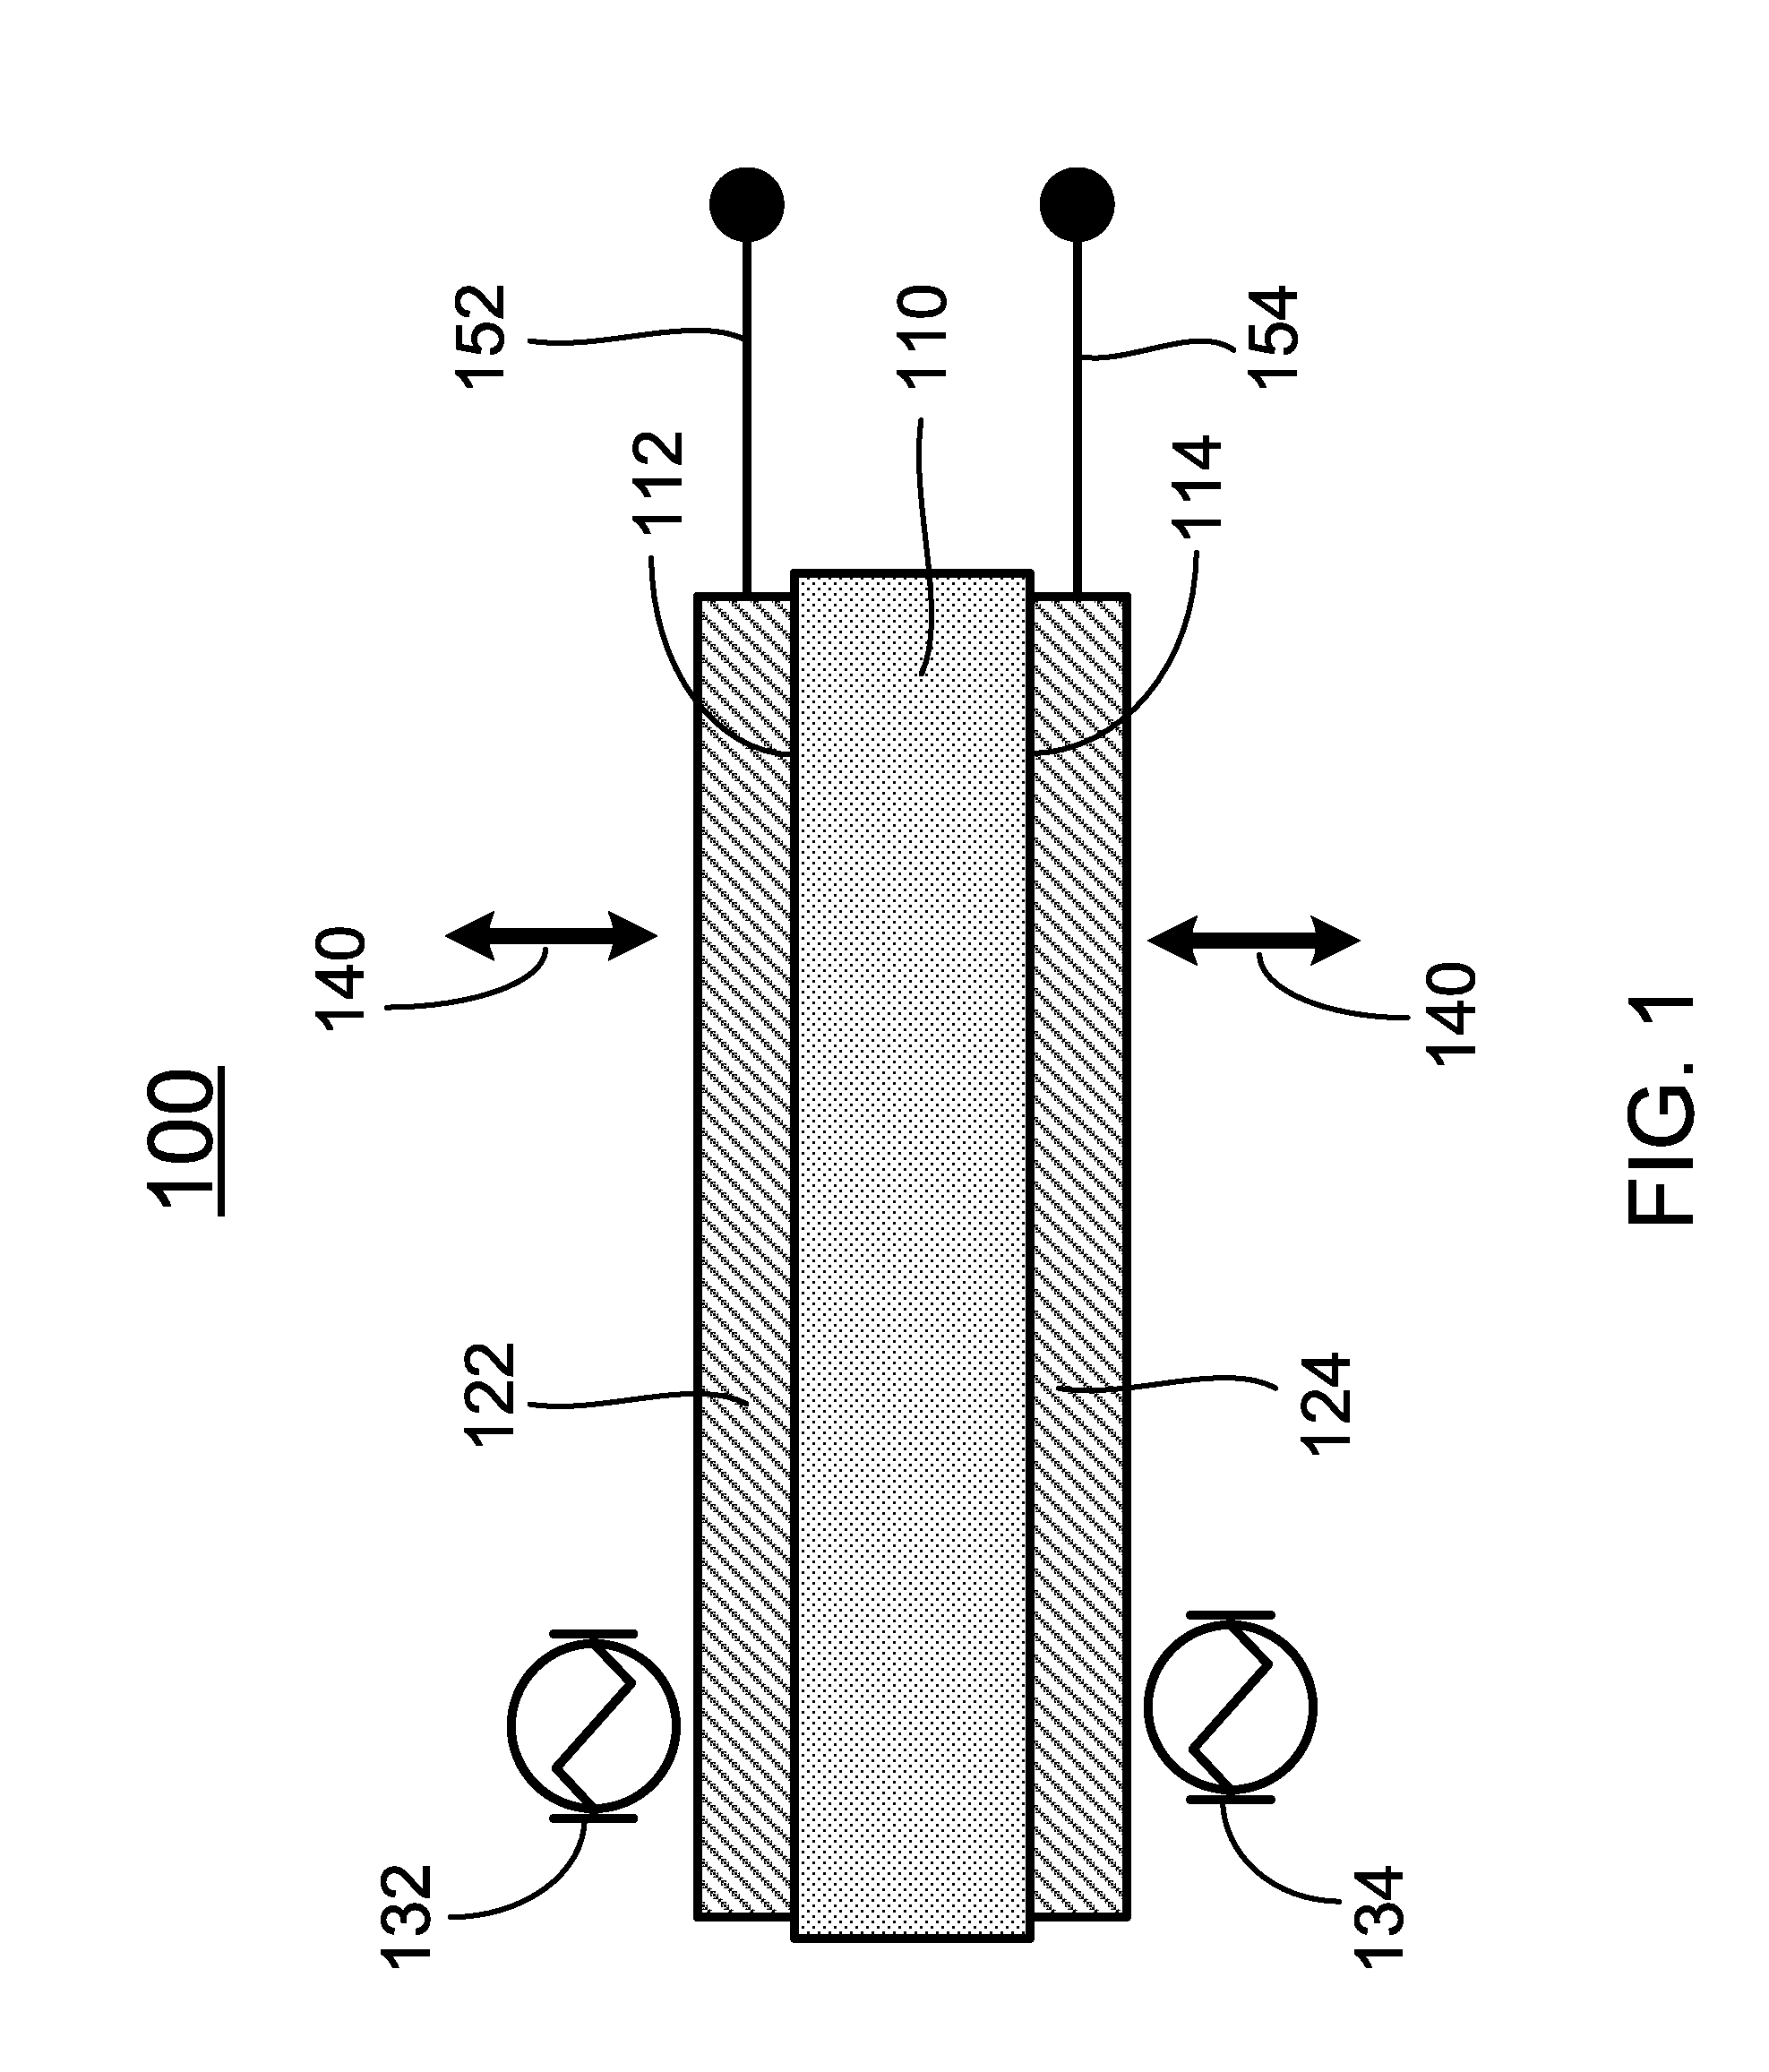 Apparatus and method for ferroelectric conversion of heat to electrical energy